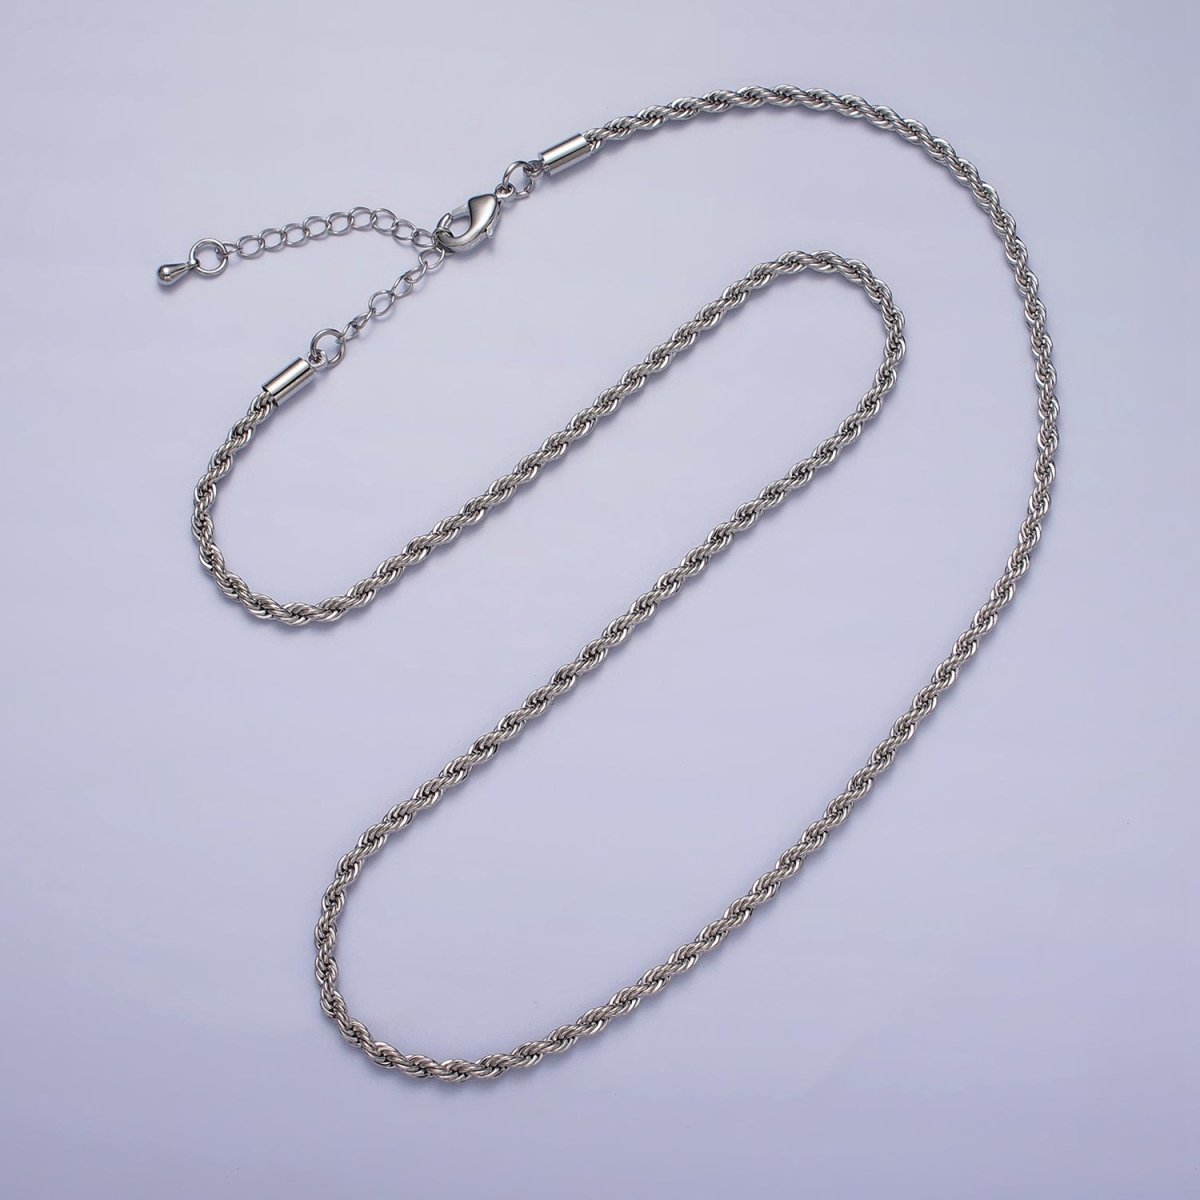 Unisex Chain Necklace, Rope Chain Necklace Gold Twist Chain, 3mm Rope Chain 18" 19.5" Necklace | WA-1520 WA-1521 WA-1522 WA-1523 Clearance Pricing - DLUXCA